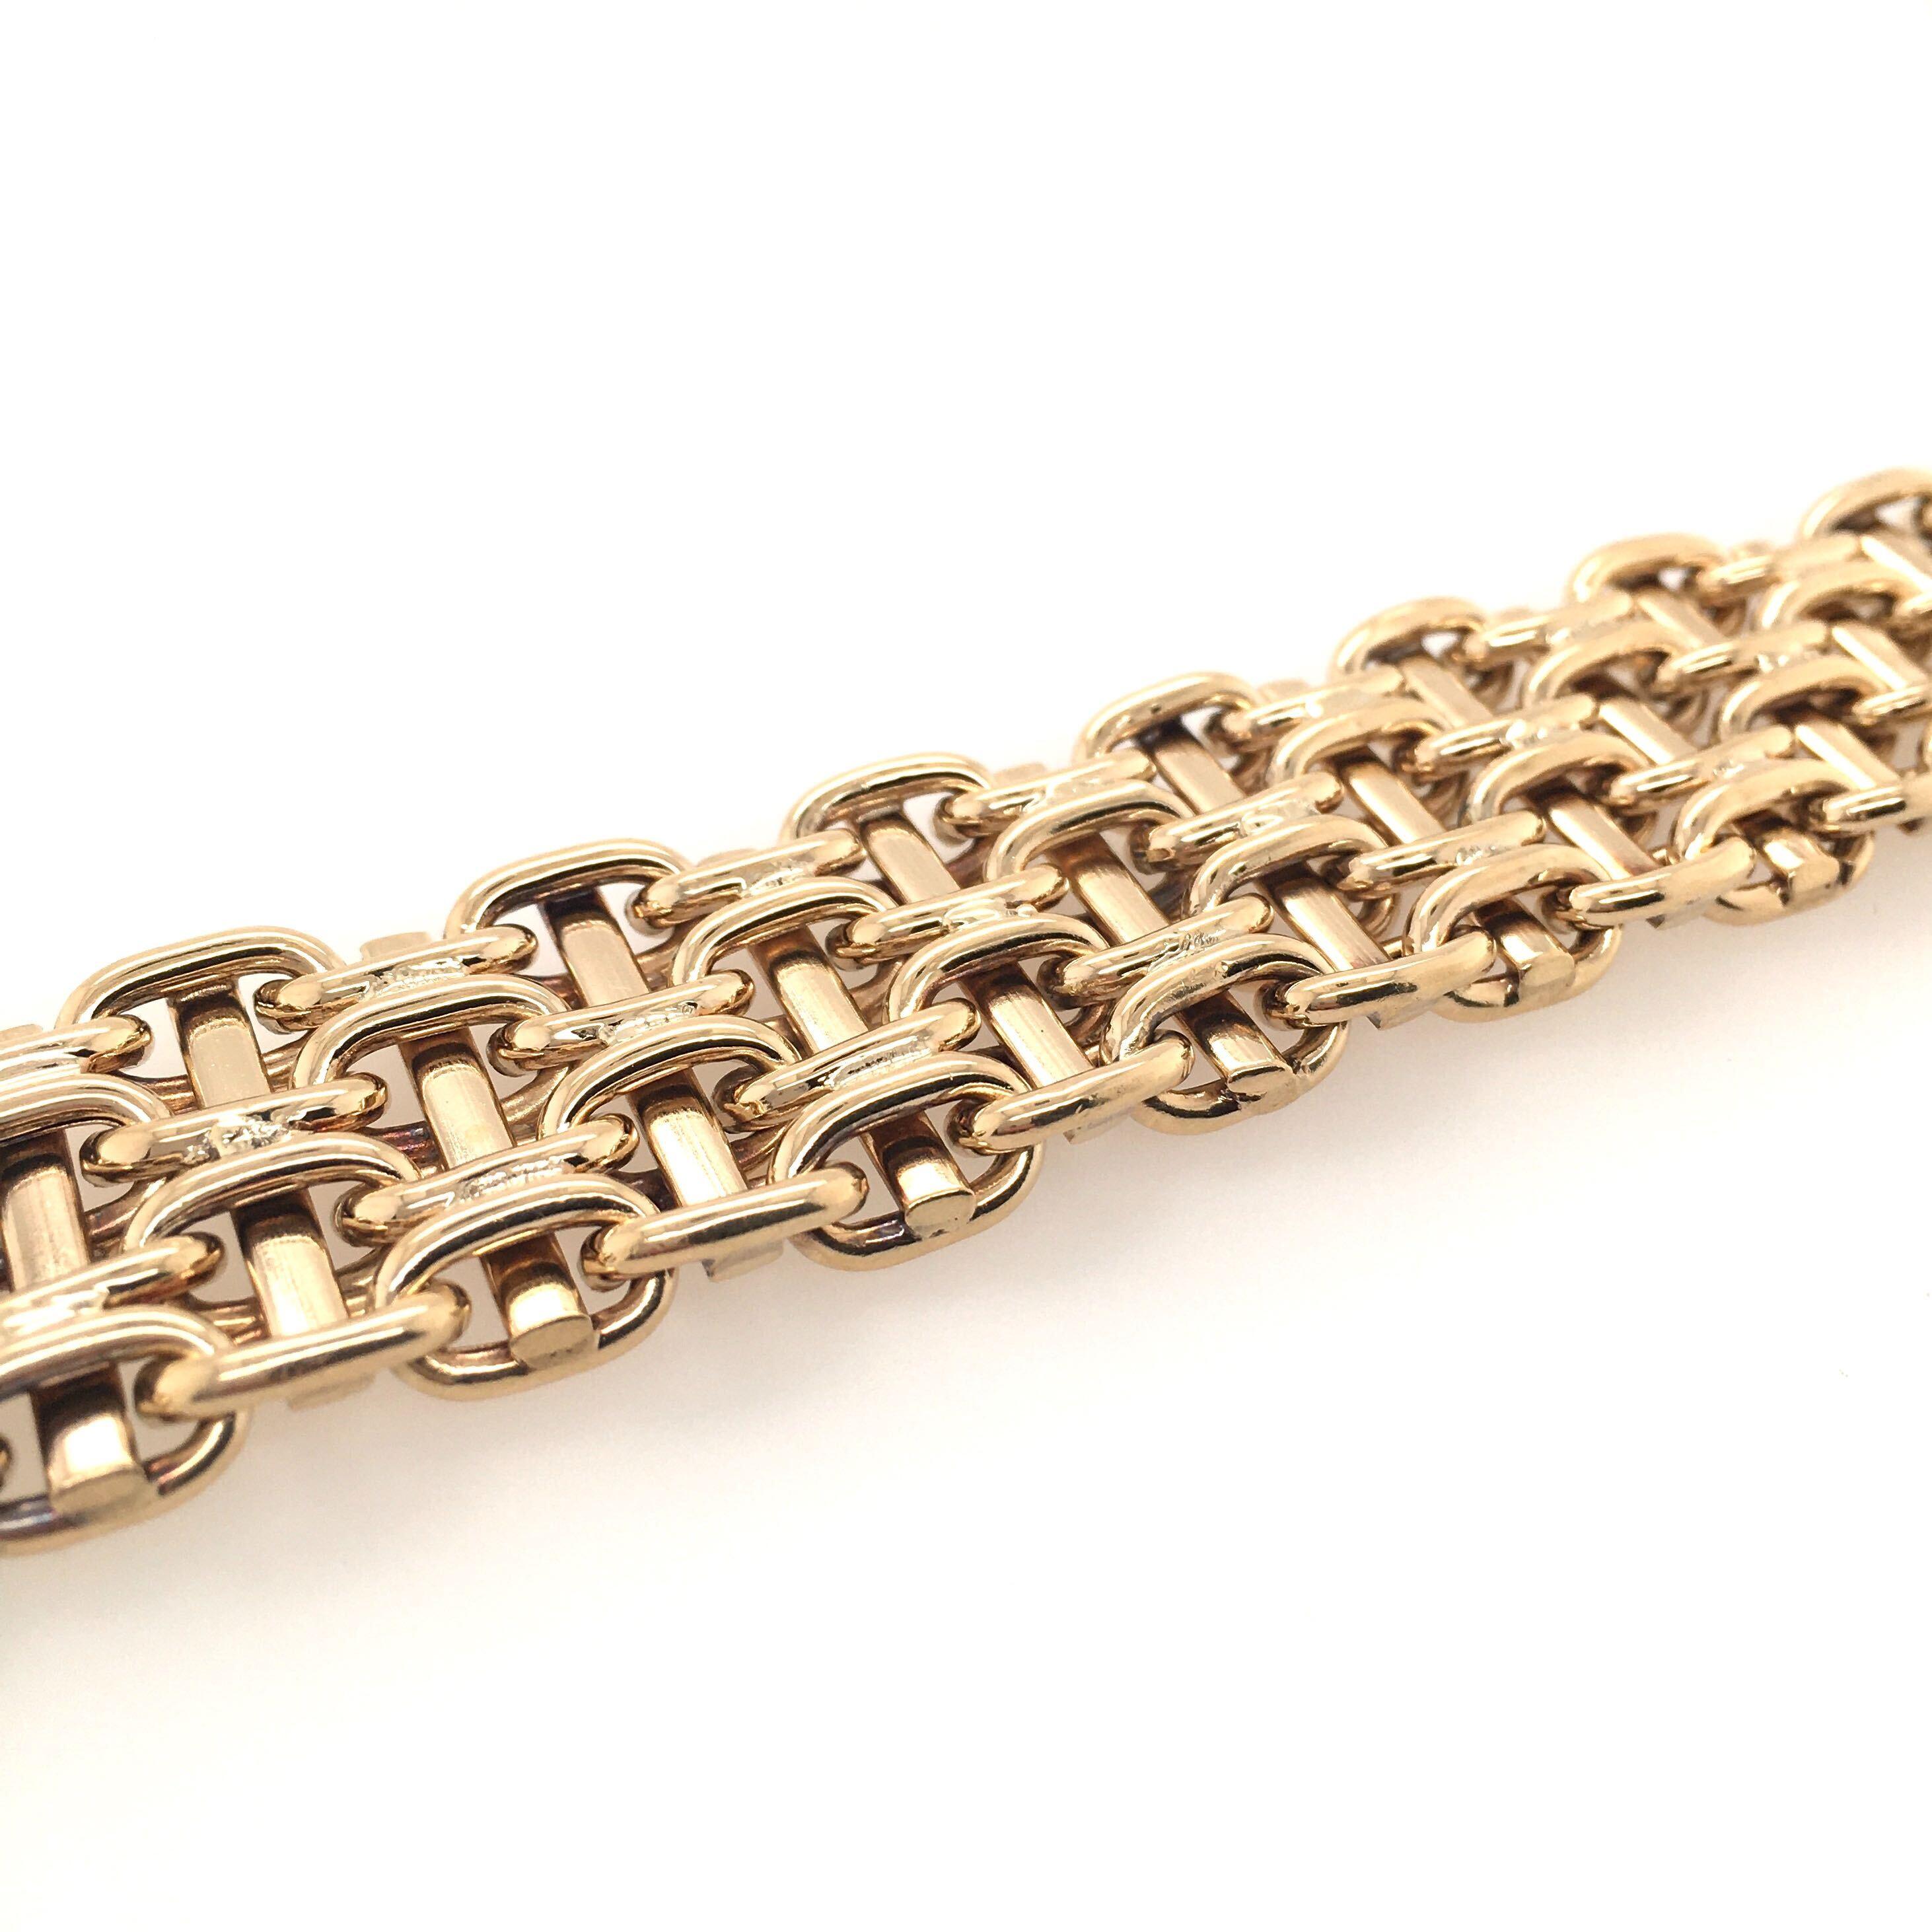 A 14 karat yellow gold bracelet.  The fancy mesh link bracelet measures scant 5/8 inch wide.  Length is approximately 7 inches, gross weight is approximately 59.1 grams. 